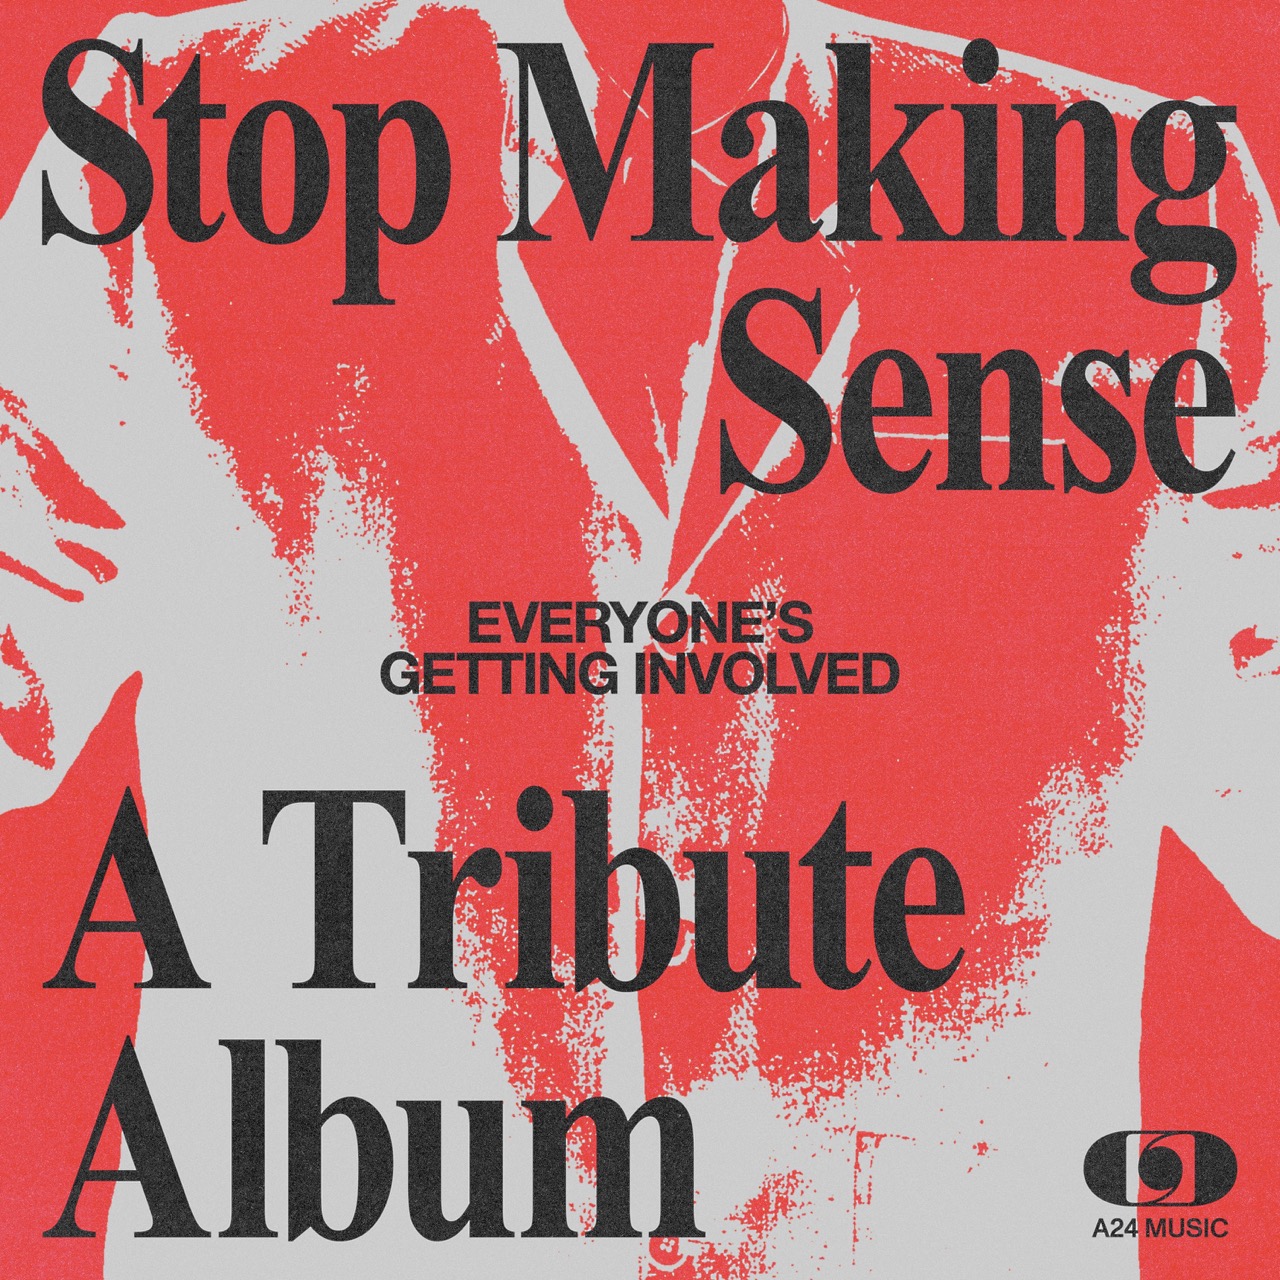 Everyone's Getting Involved: A Tribute To Talking Heads' Stop Making Sense